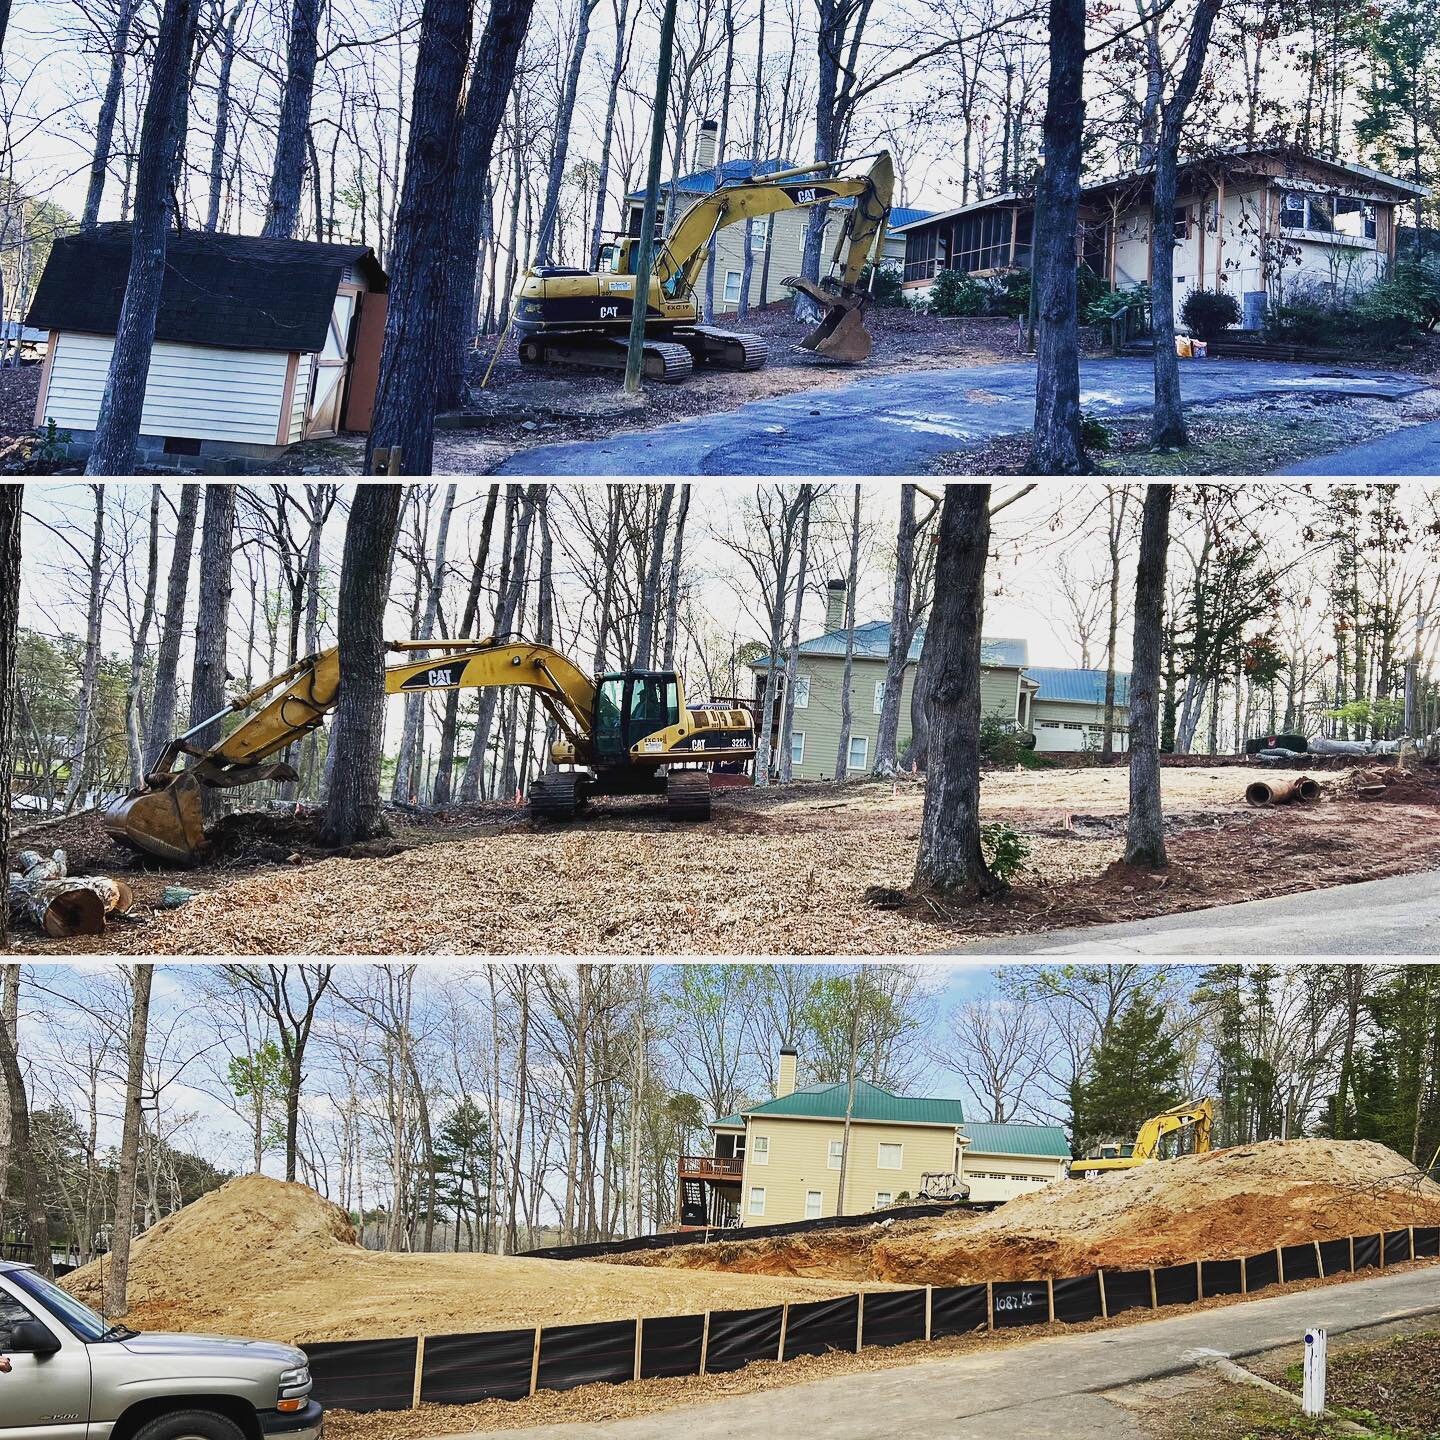 Before
⬇️
During 
⬇️
After!

We sincerely appreciate the opportunity to transform this property. Excited to see this client&rsquo;s new build moving forward!